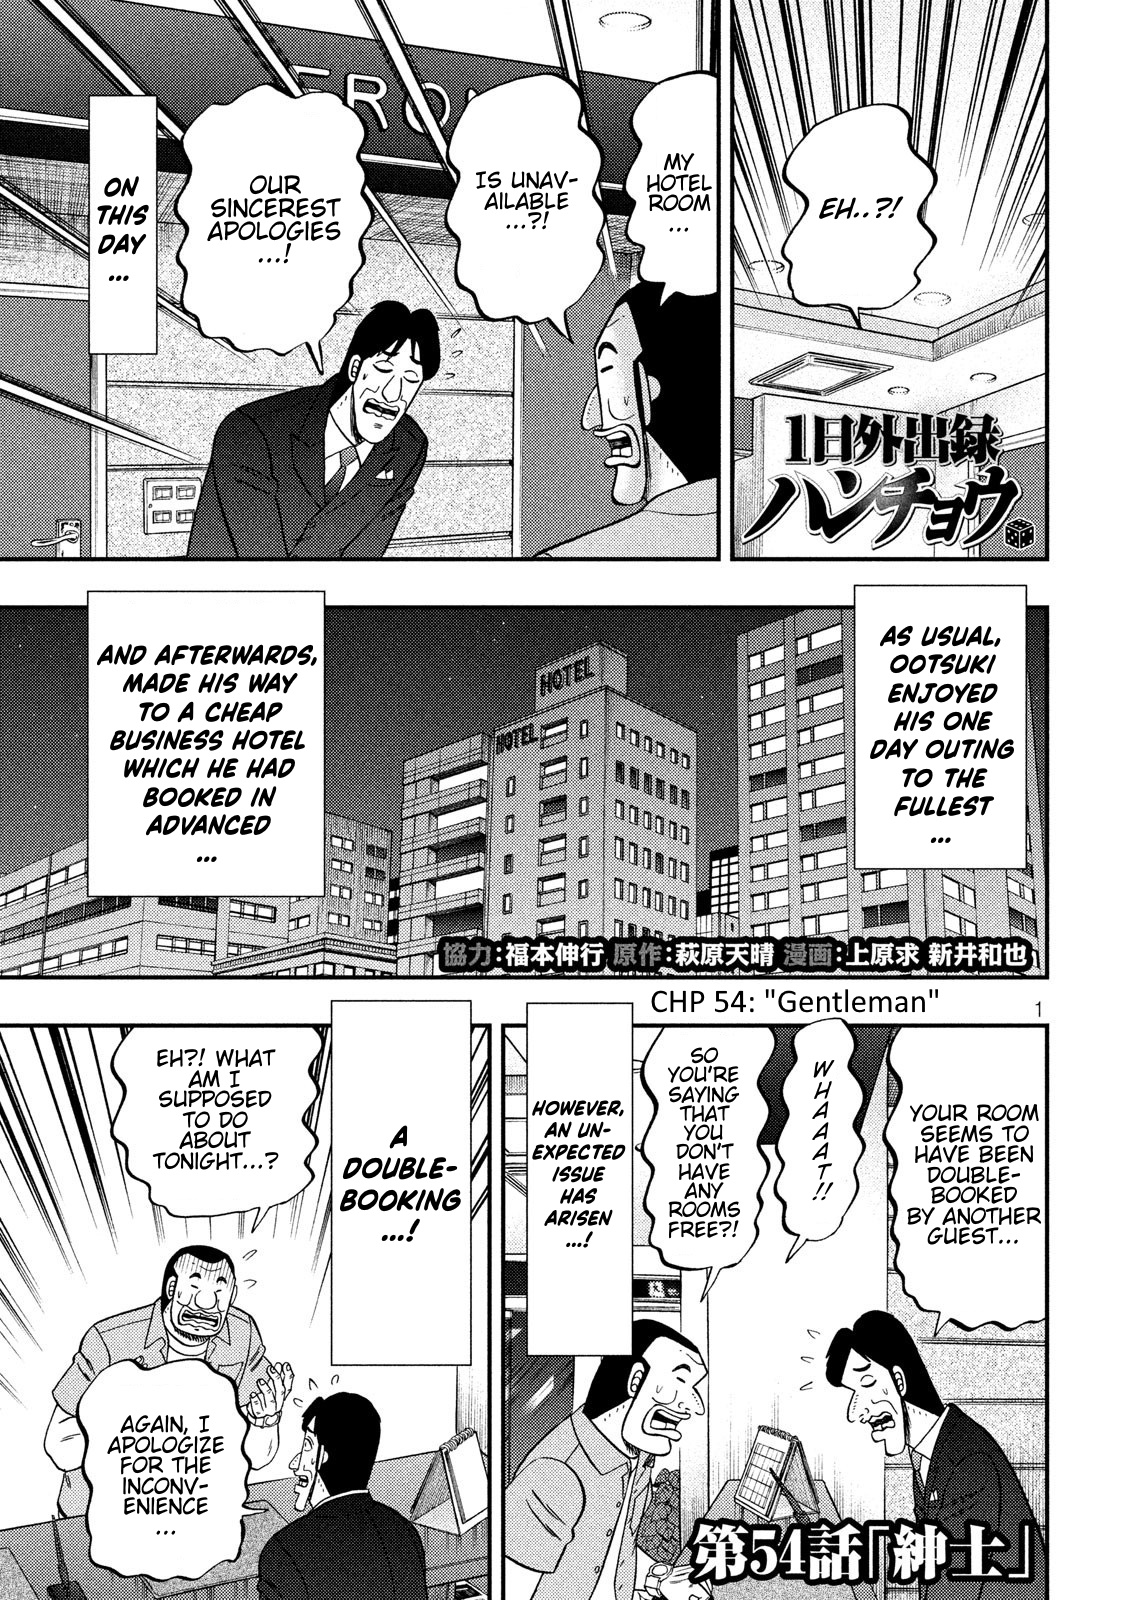 One Day Outing Foreman Vol.7 Chapter 54: Gentleman - Picture 1